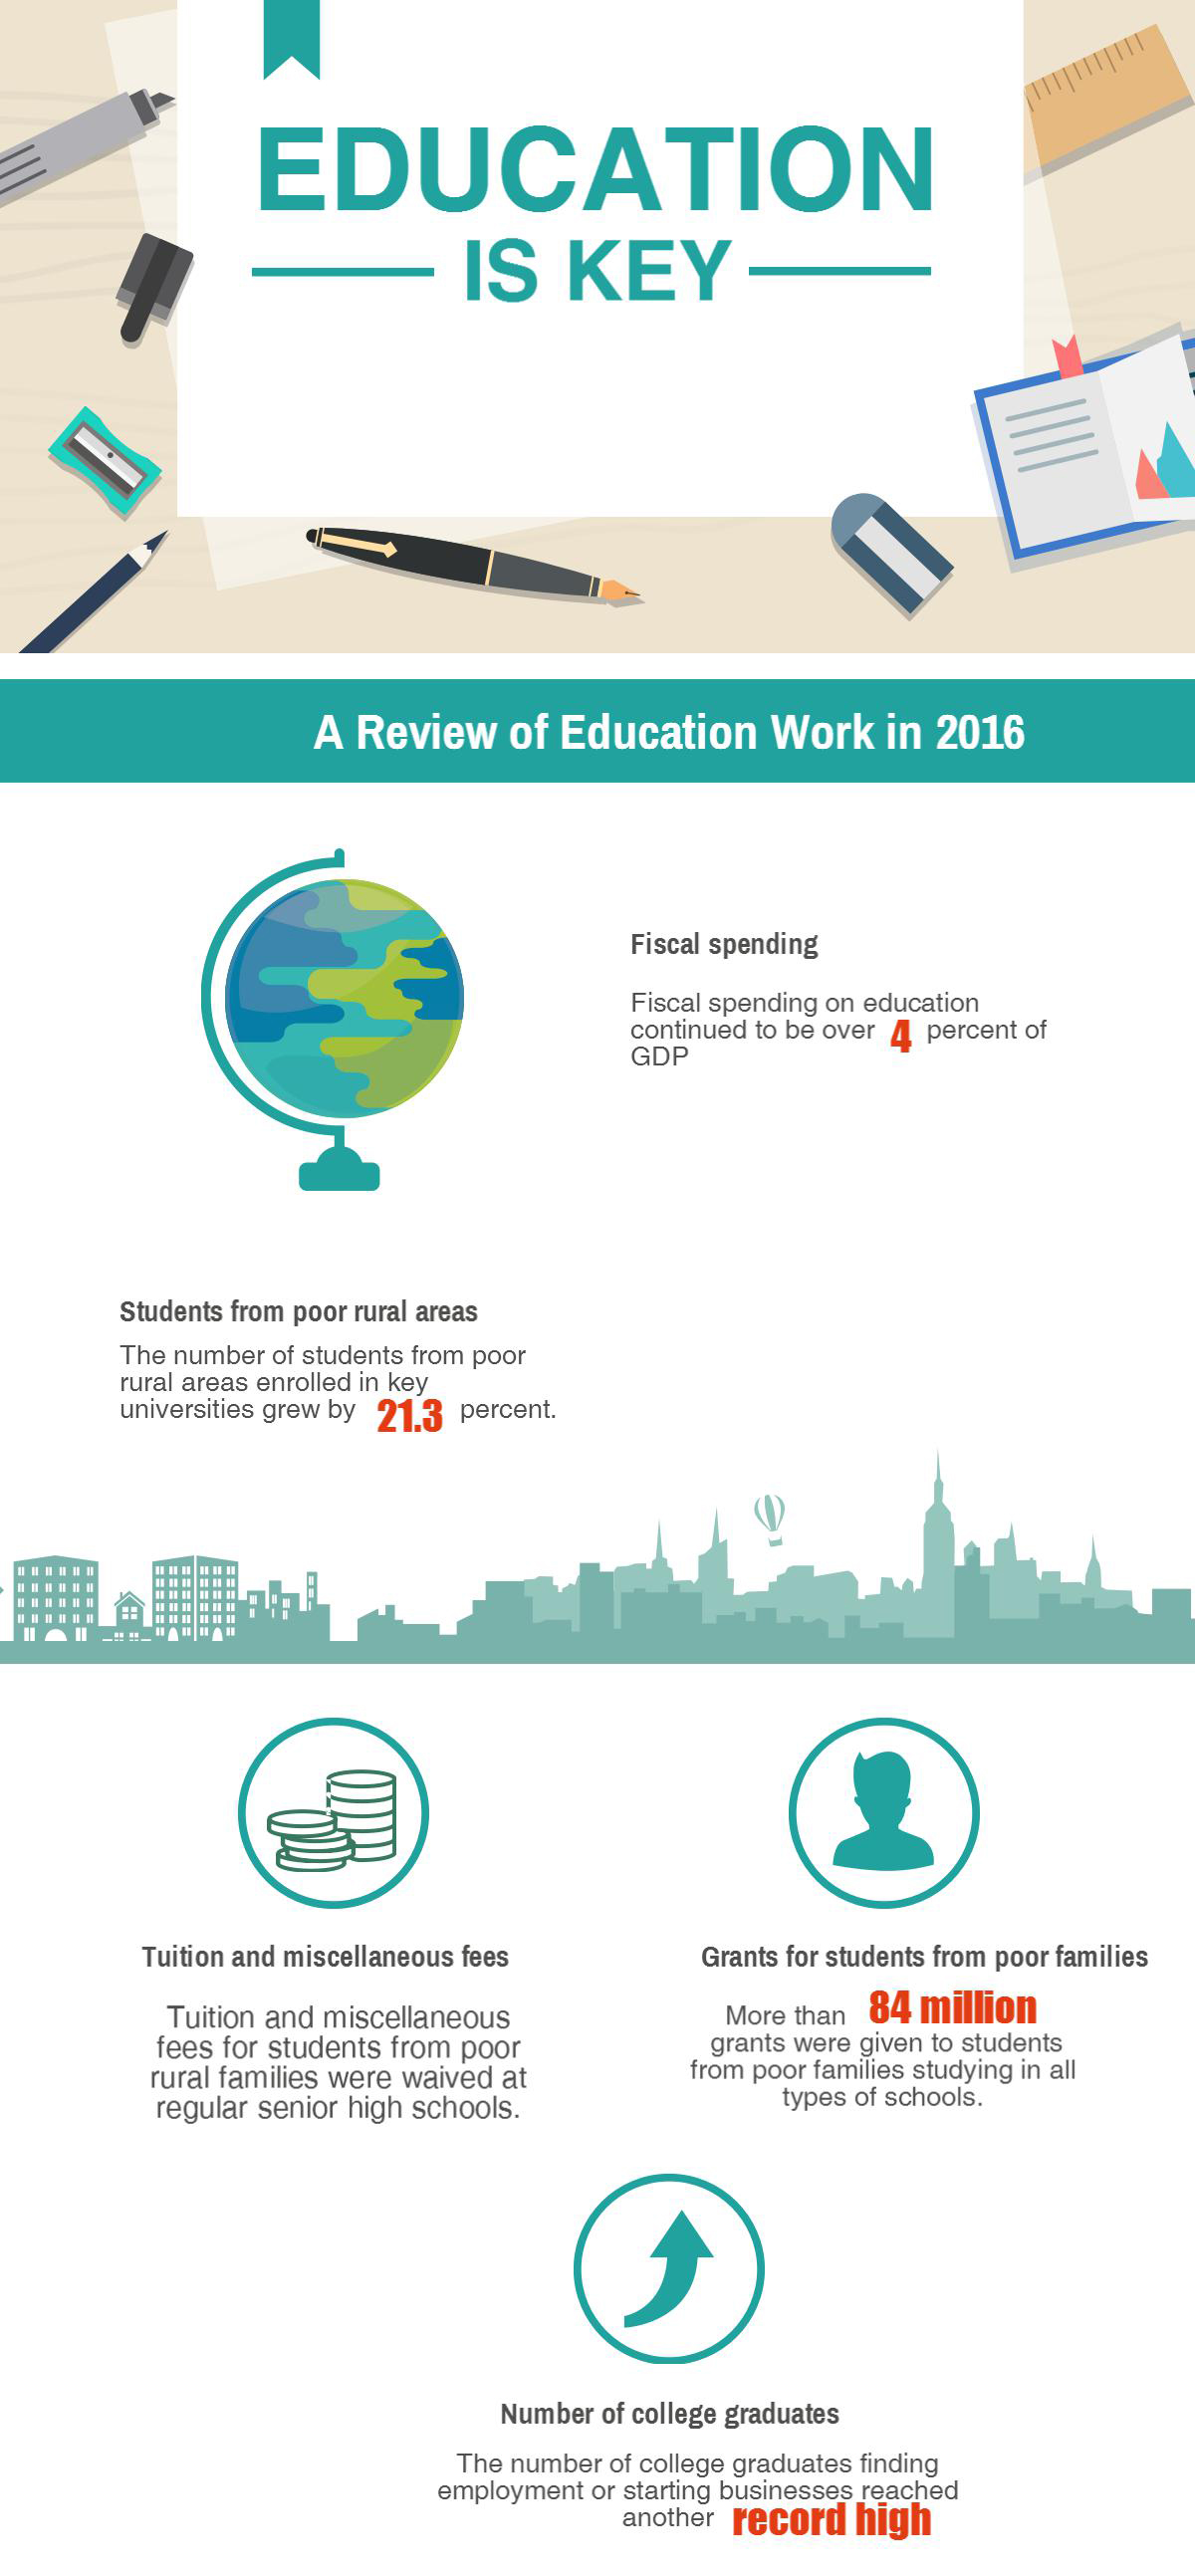 A review of education work in 2016